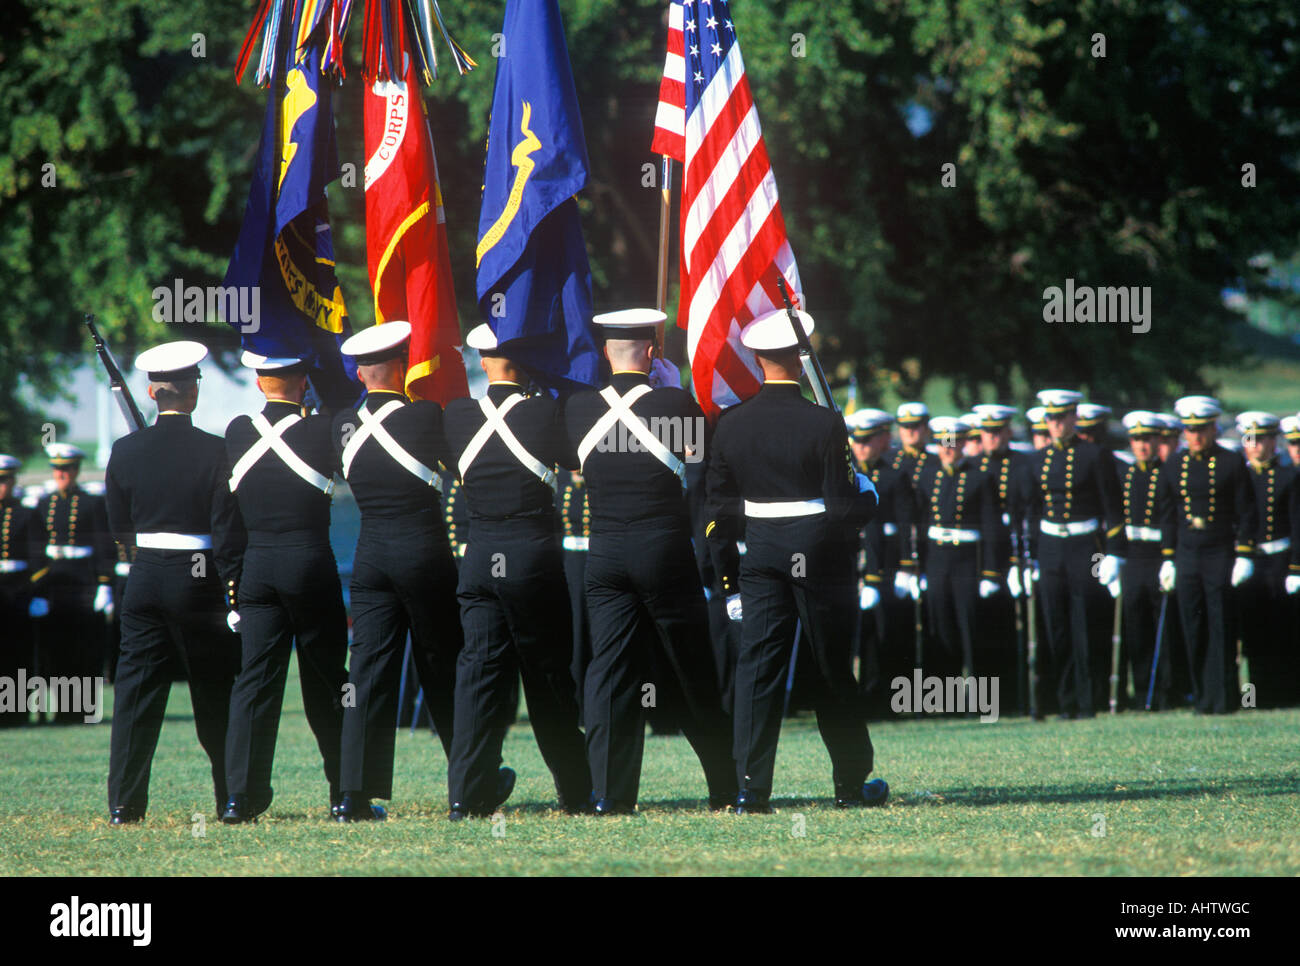 Midshipmen Color Guard United States Naval Academy Annapolis Maryland Stockfoto